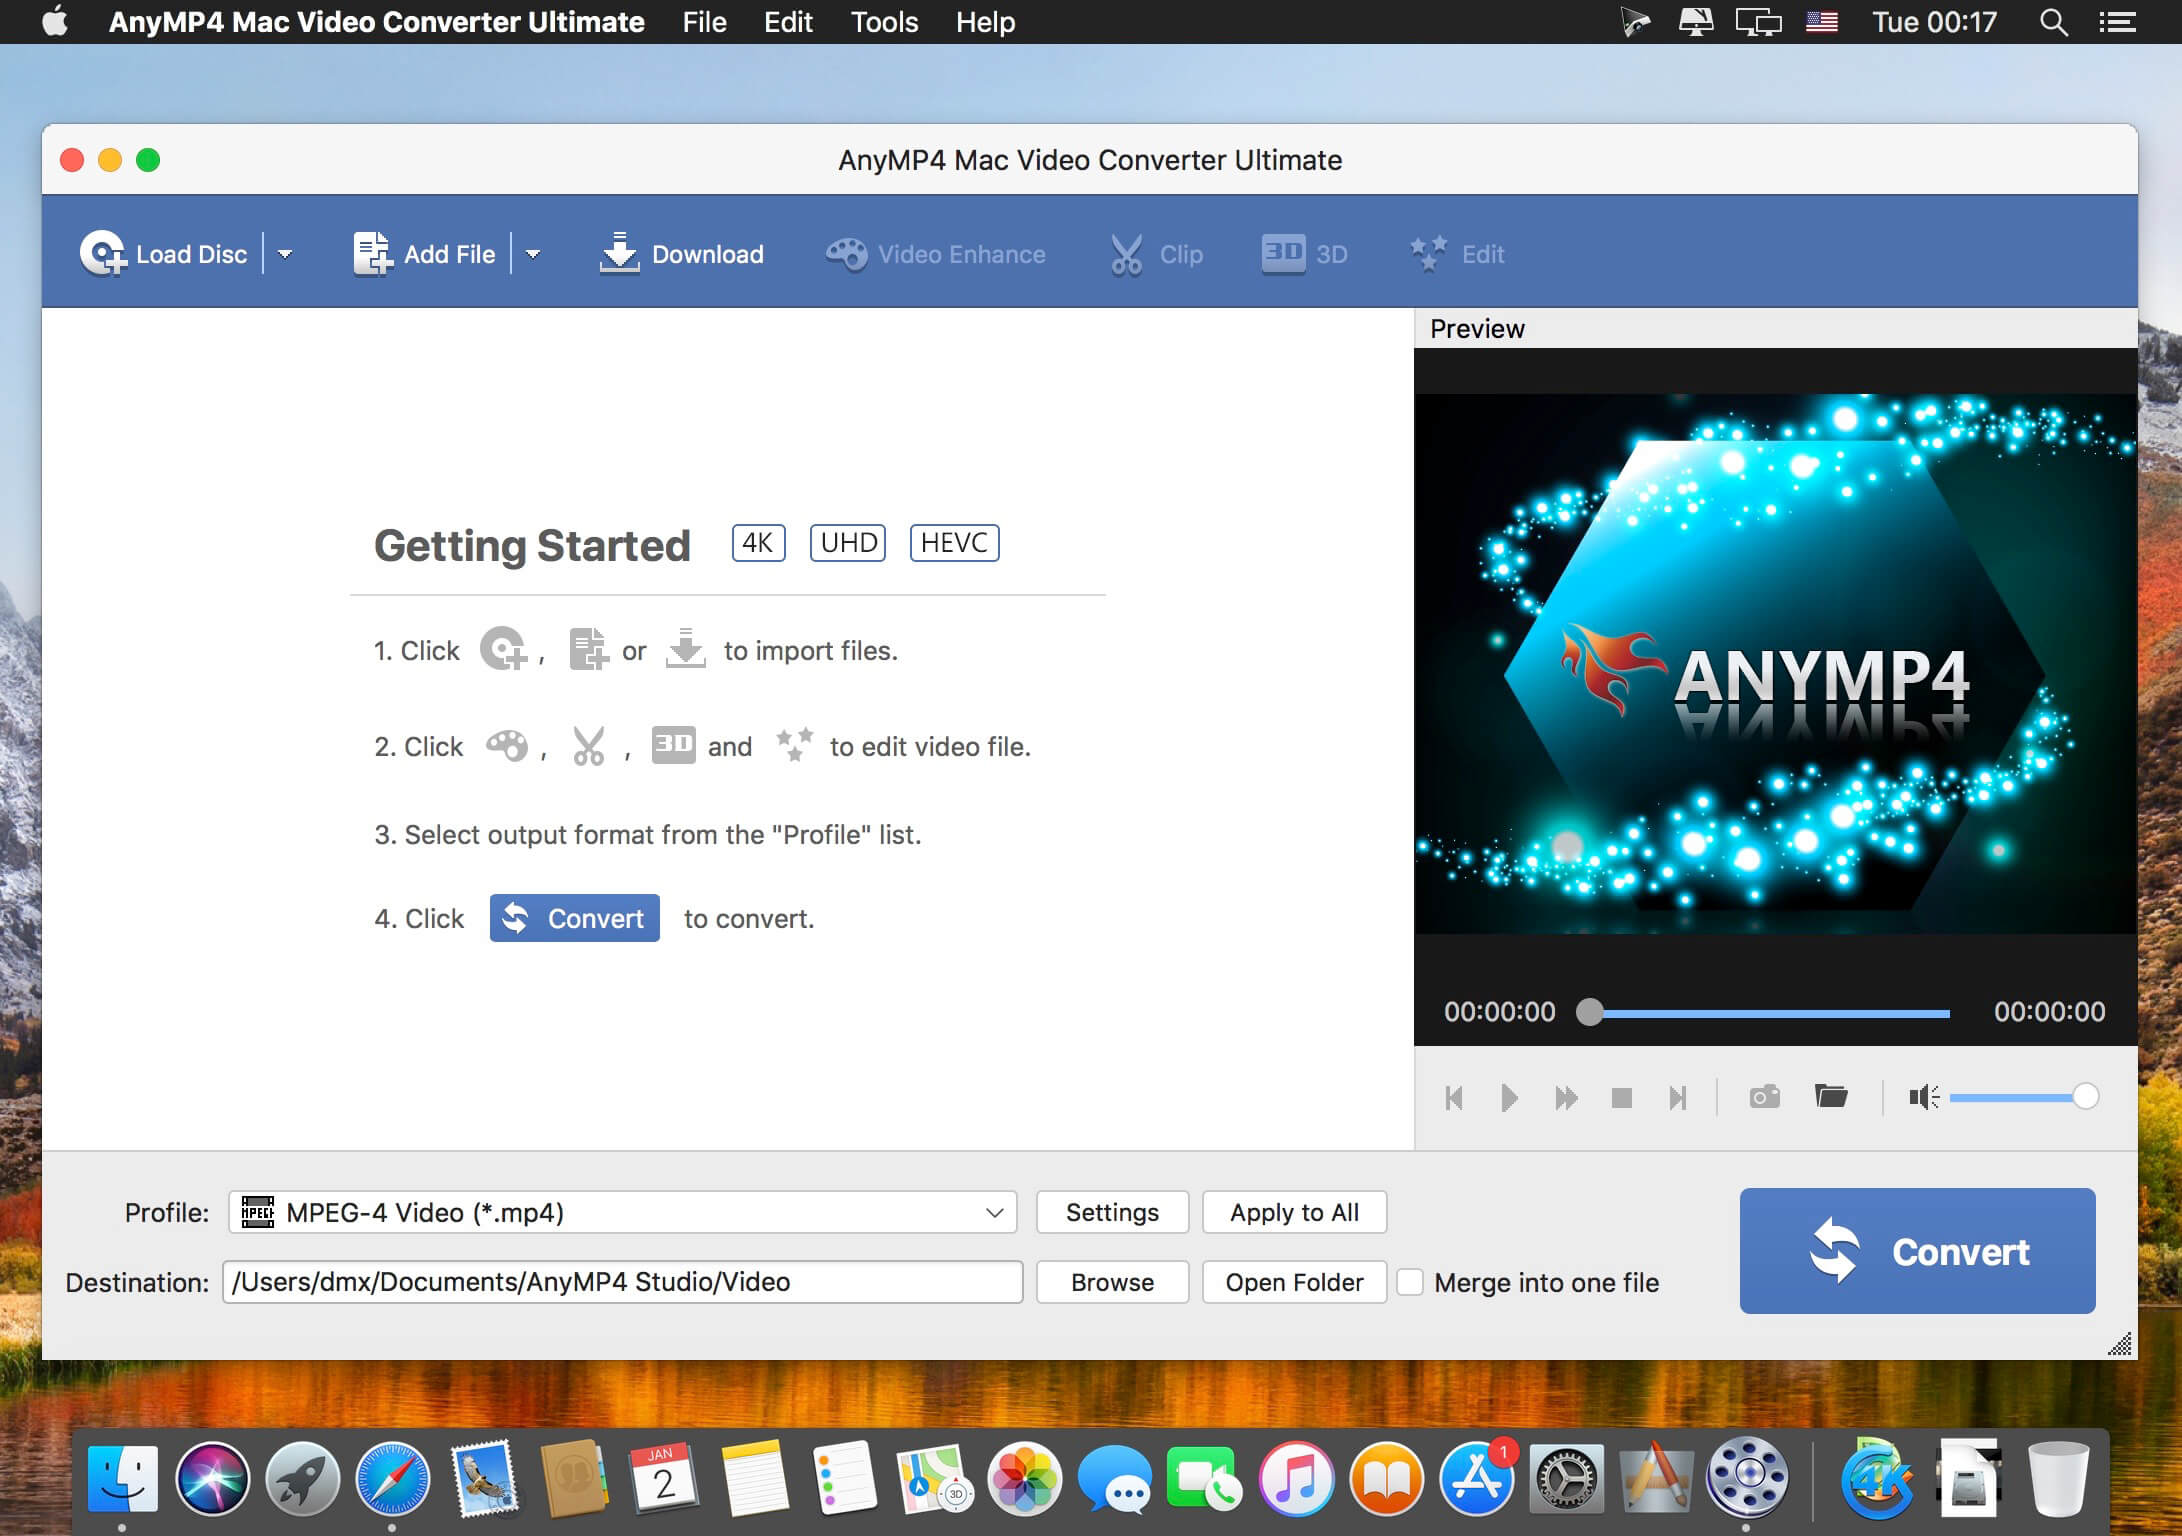 instal the last version for mac AnyMP4 iOS Cleaner 1.0.26